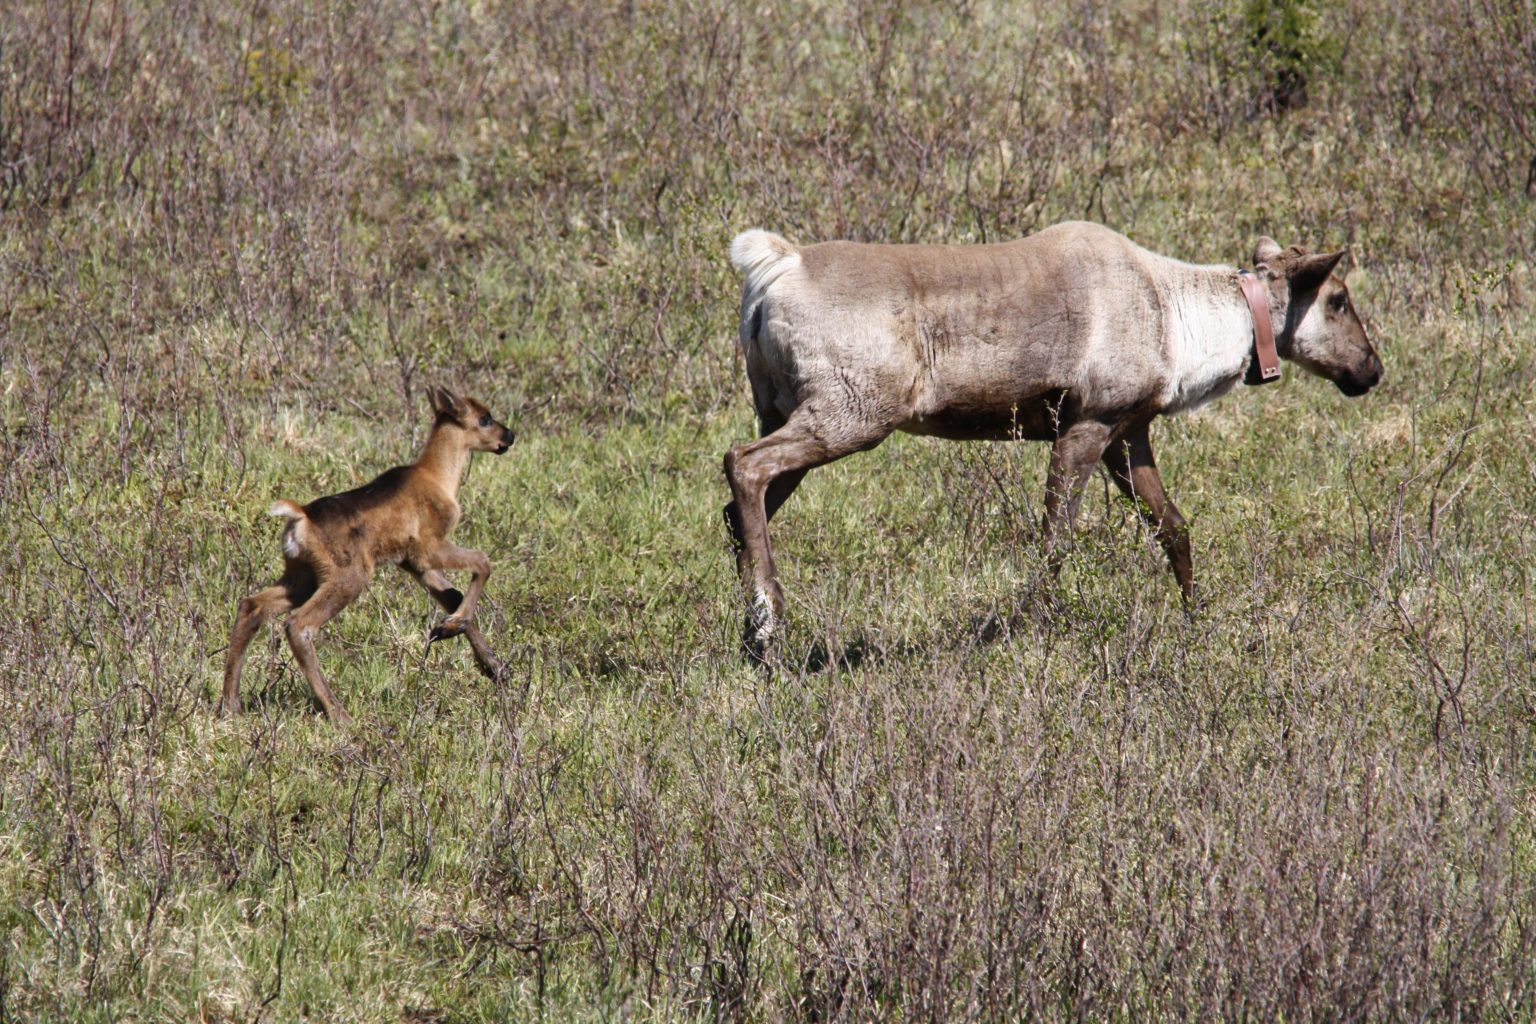 A mother caribou wearing a collar followed by her calf